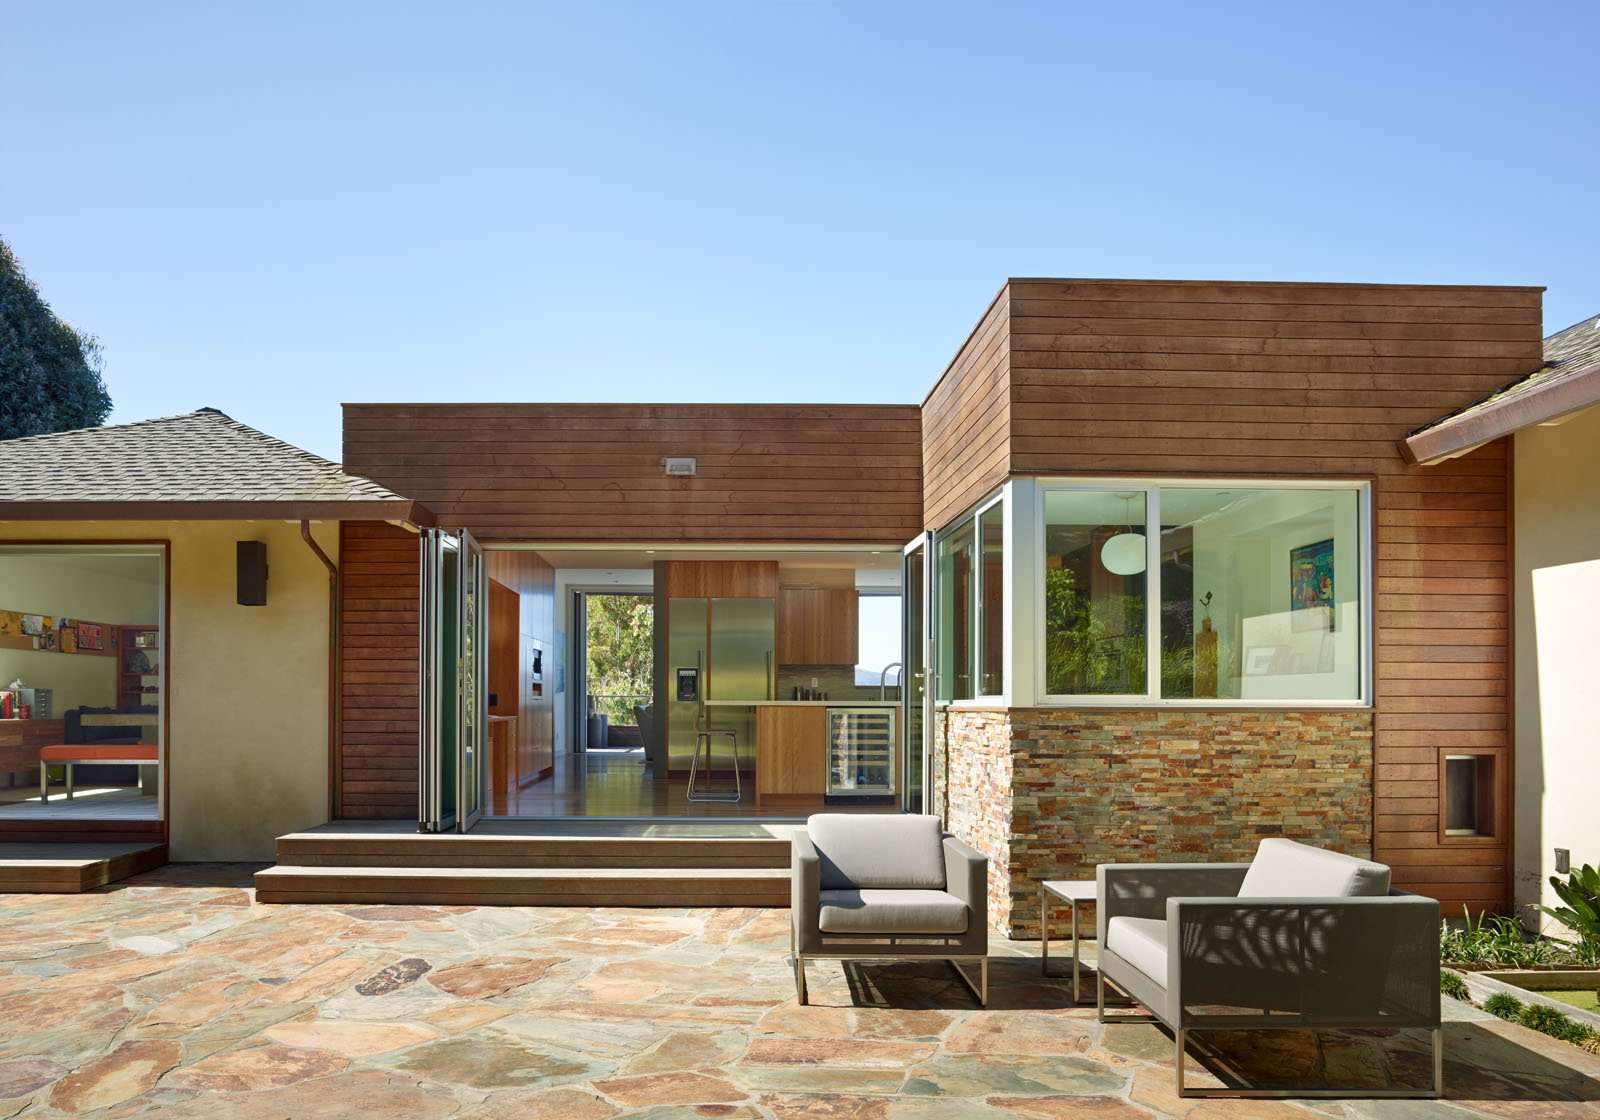 How to Master Mid-Century Modern Renovation? Tip One: Modernize the